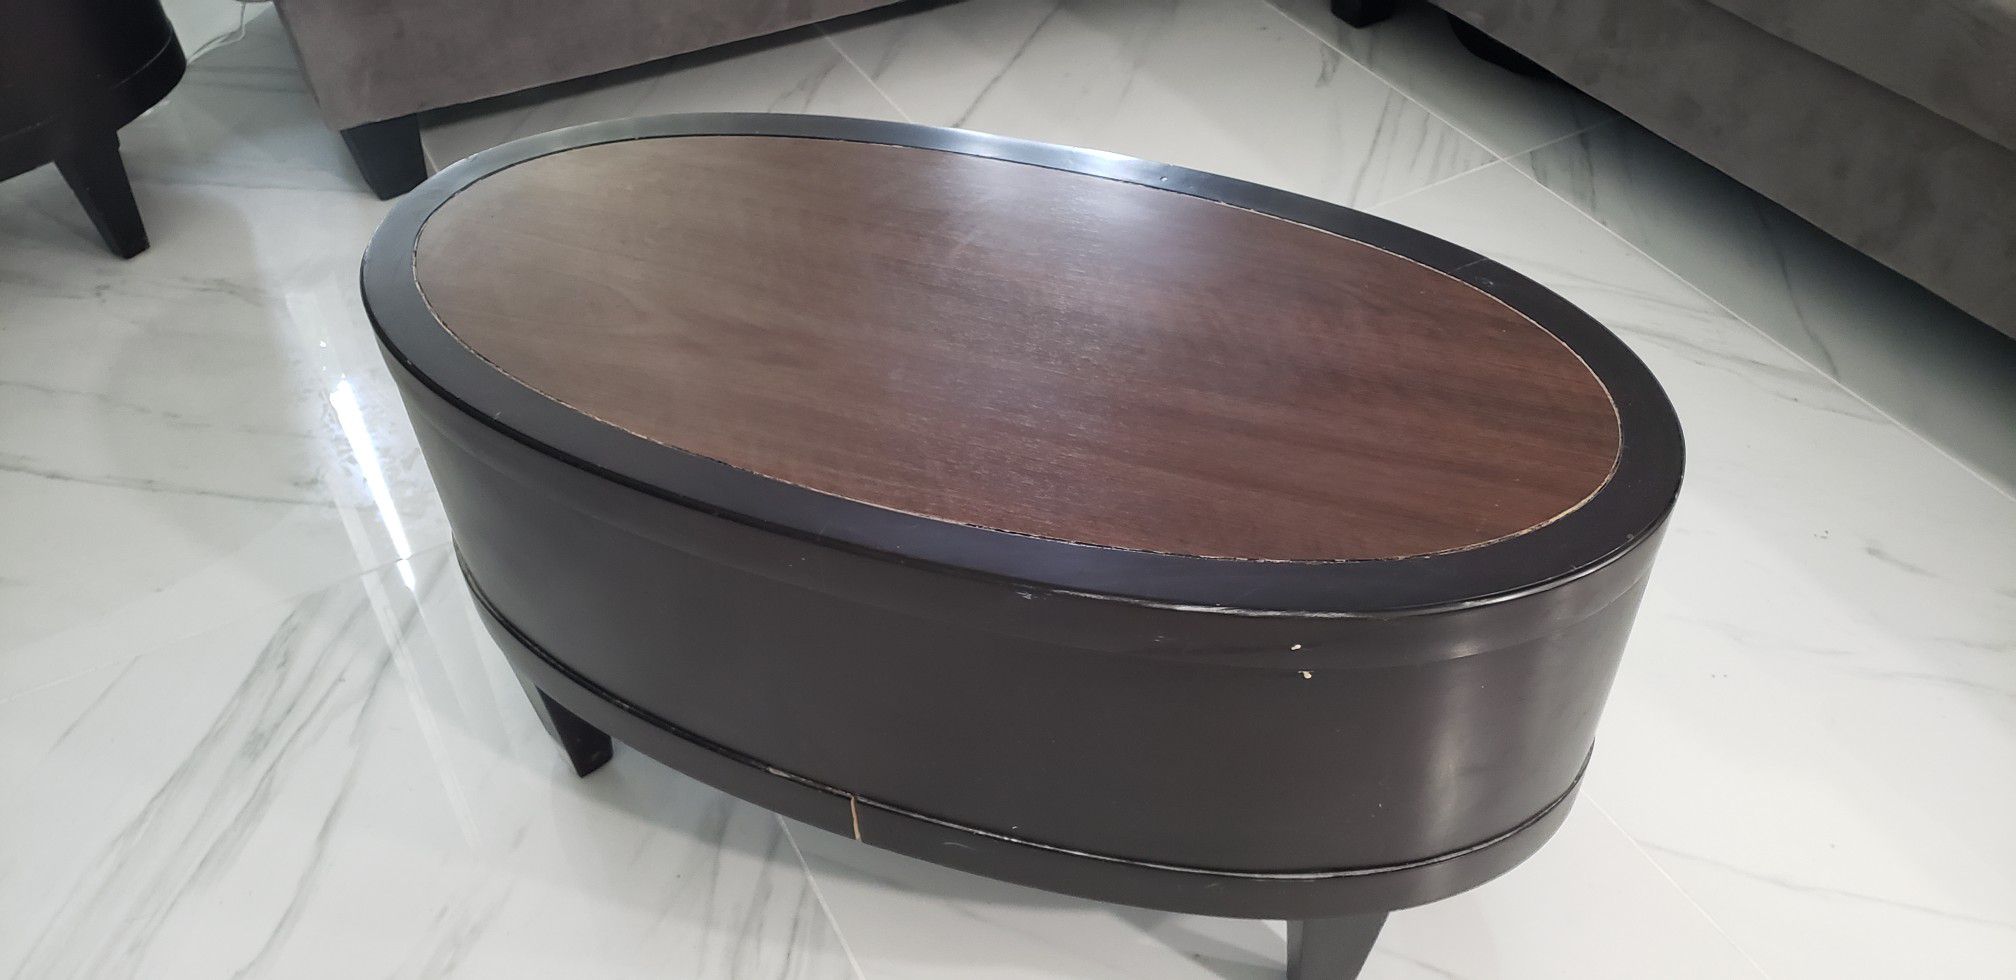 $20 for two solid wood coffee tables